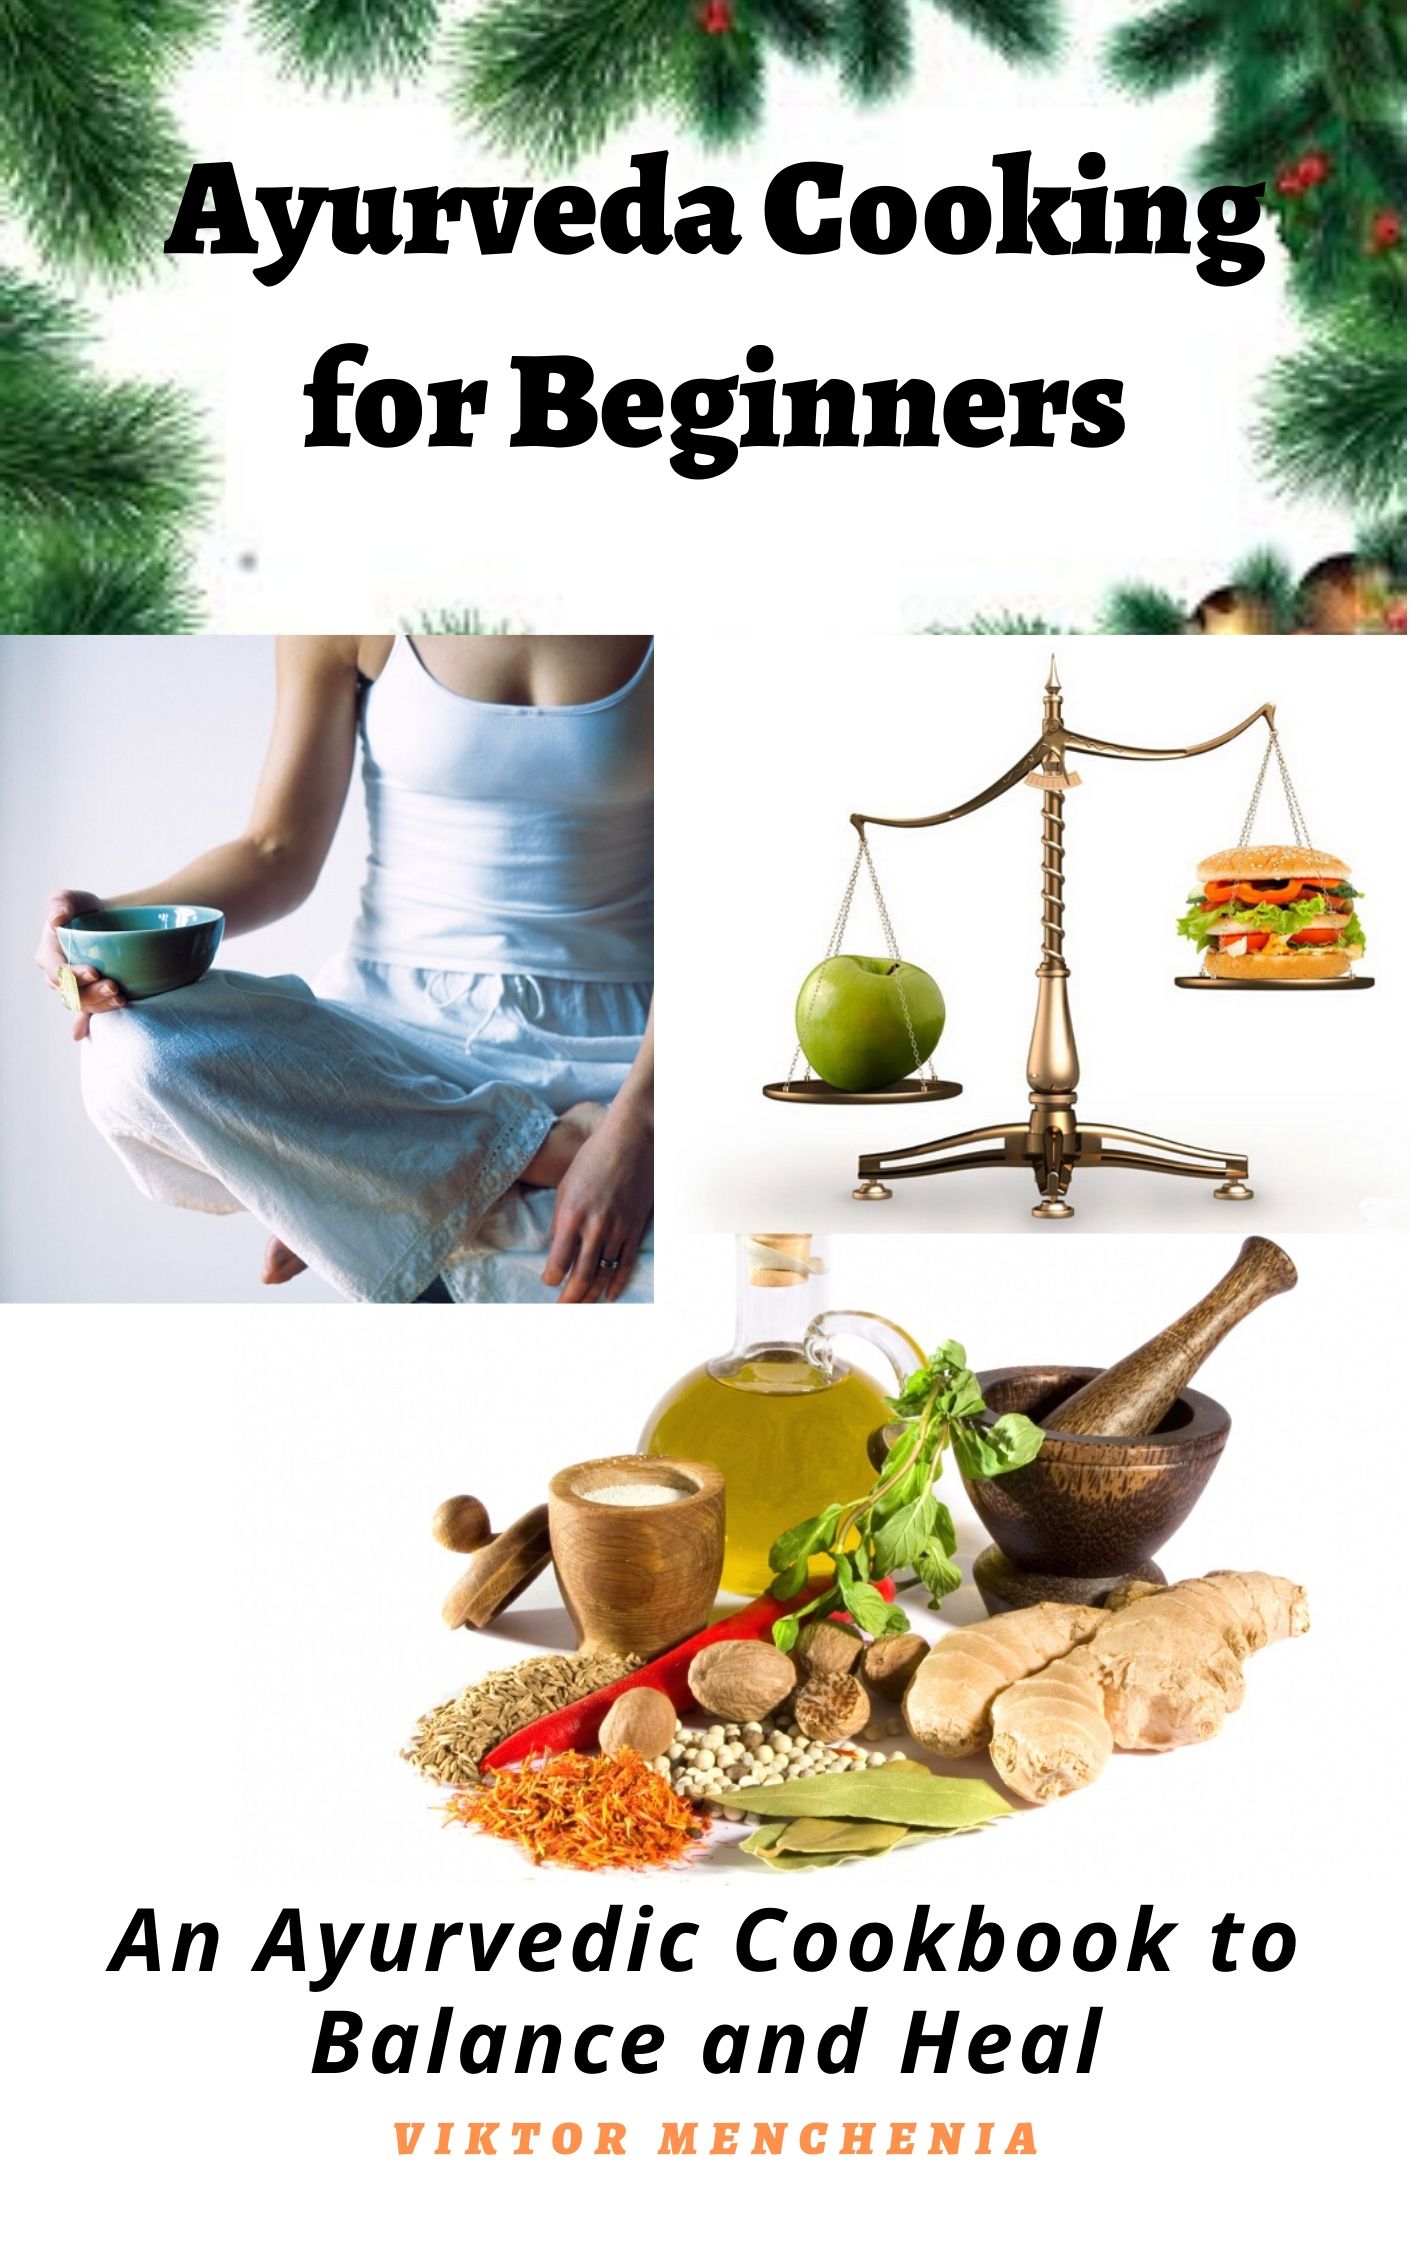 FREE: Ayurveda Cooking for Beginners by Viktor Menchenia